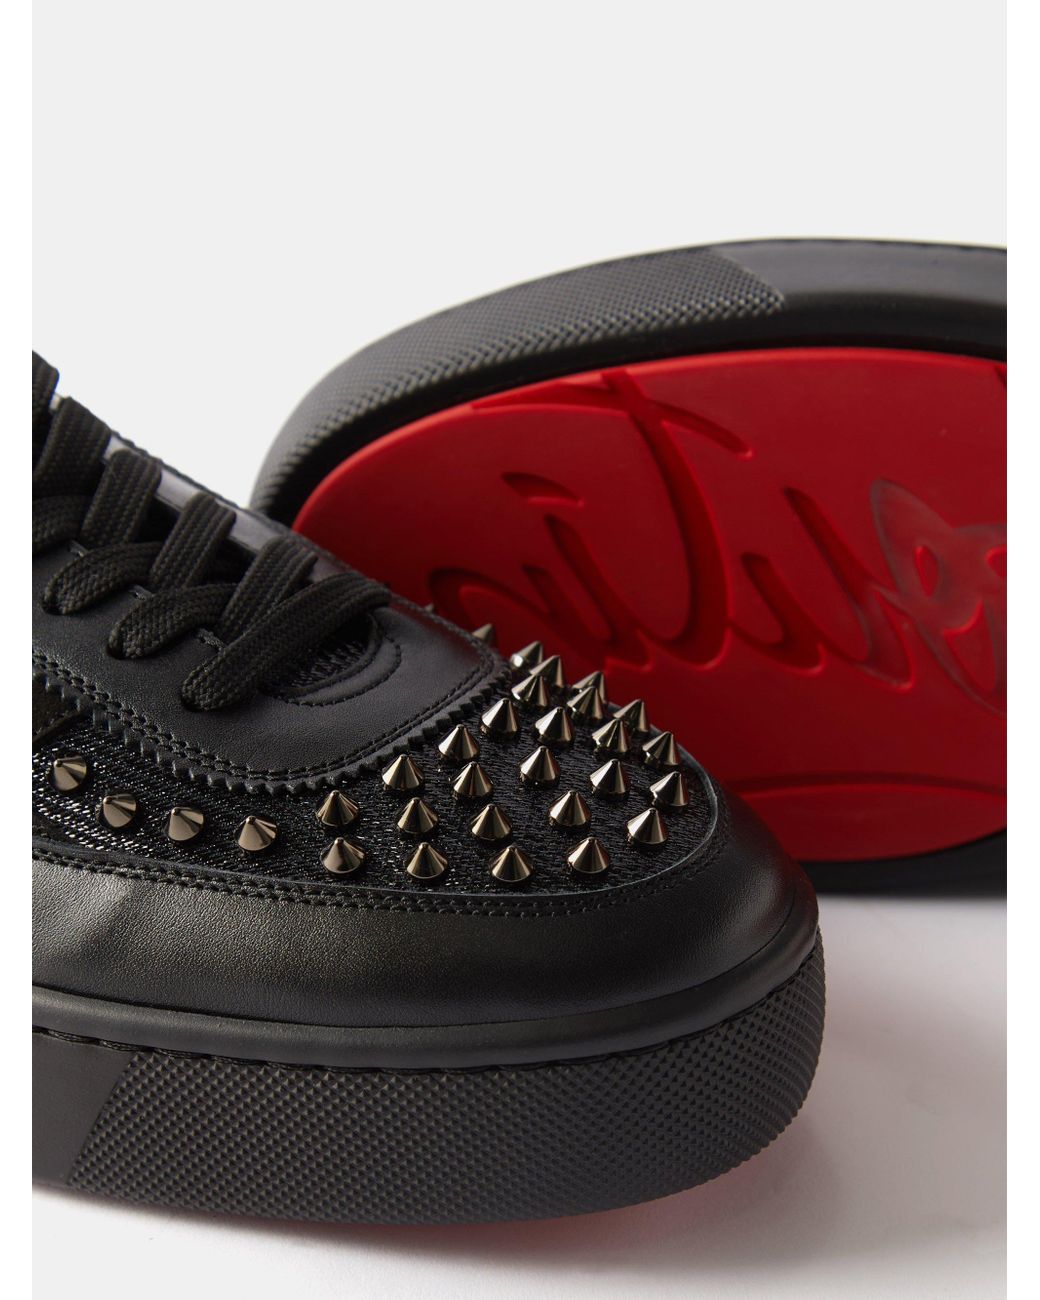 Happyrui Spikes Suede Sneakers in Black - Christian Louboutin